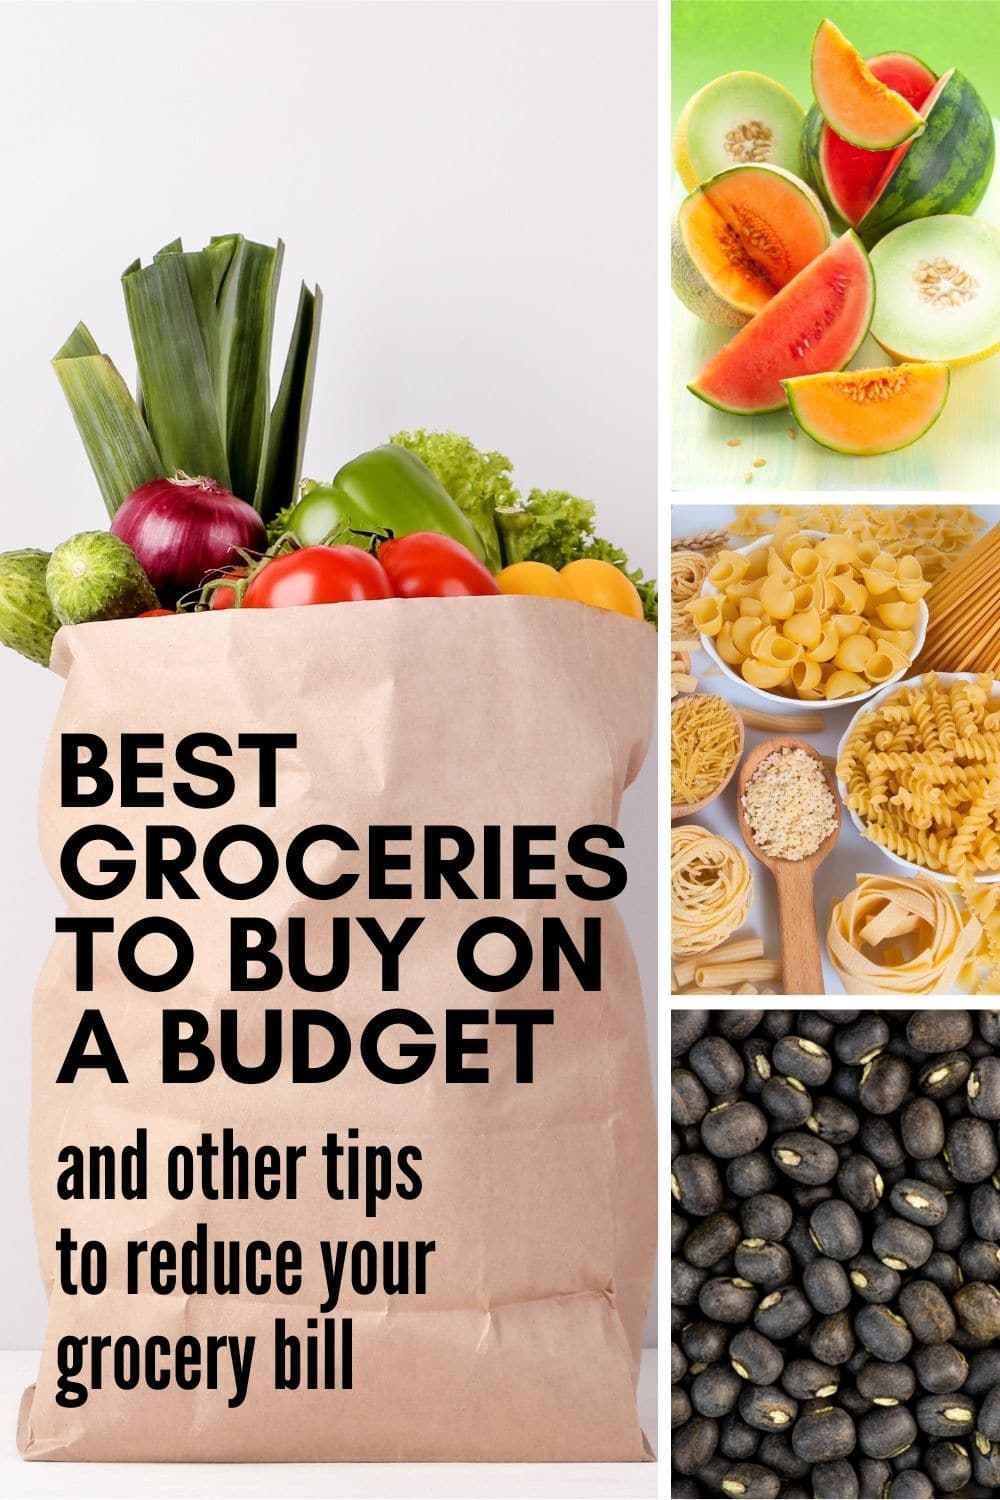 Groceries to Buy on a Budget | Eat Well for Less · Nourish and Nestle